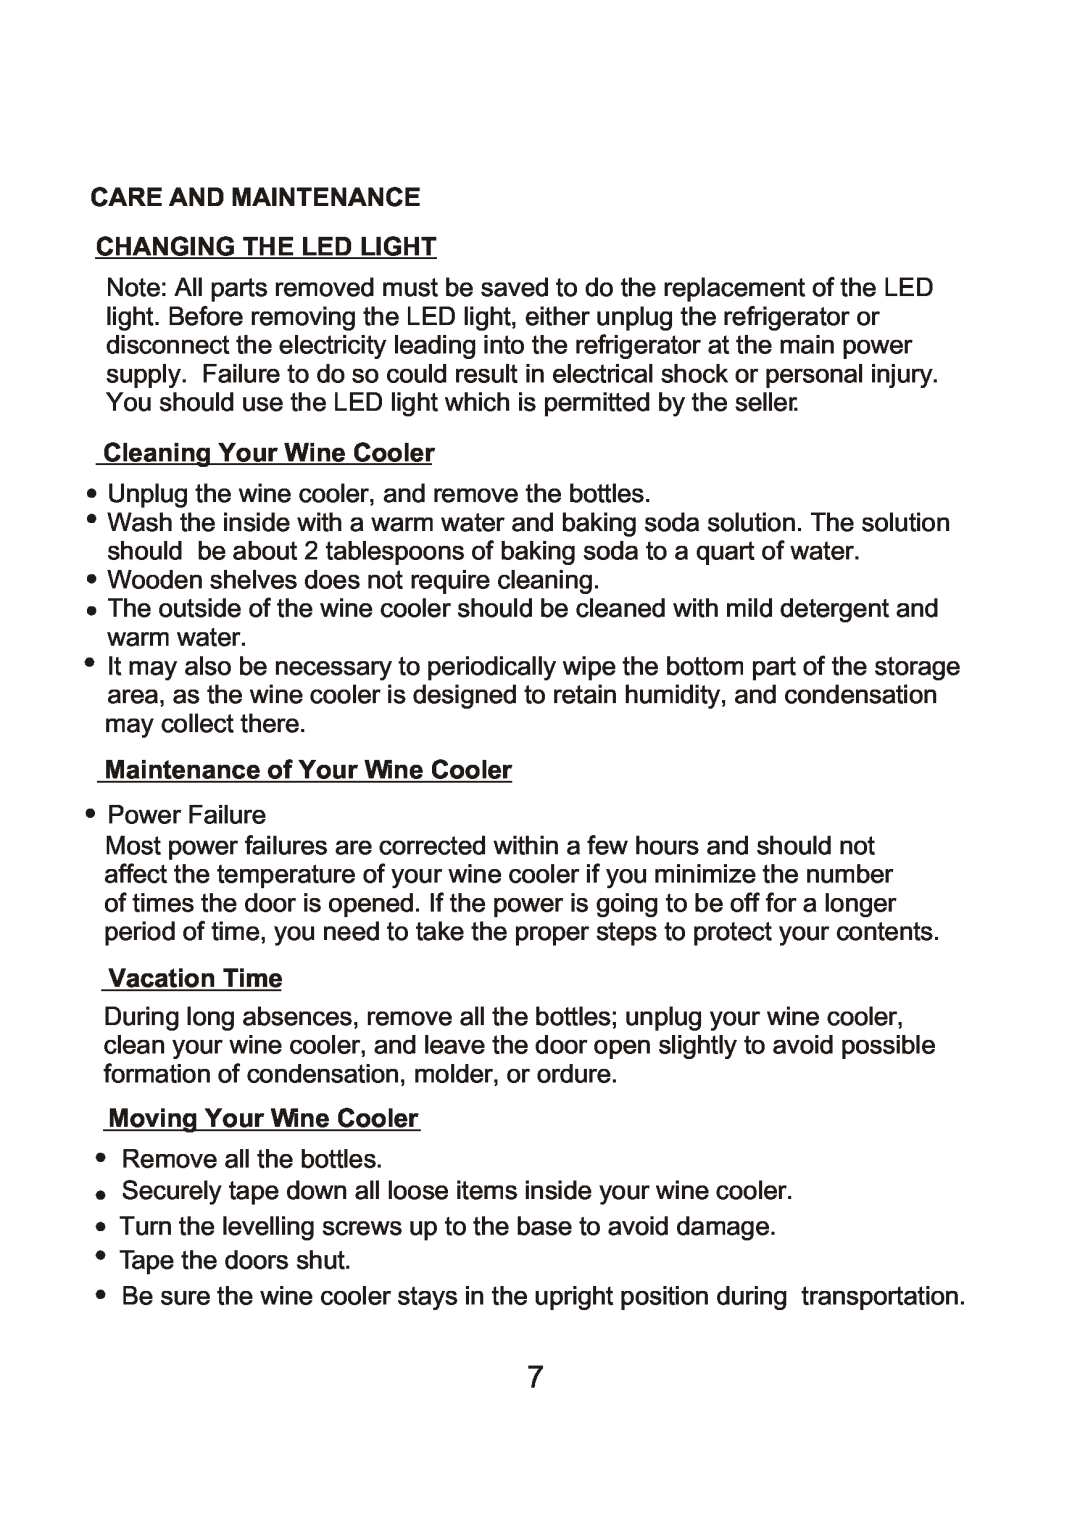 Hoover HWC 2335 Care And Maintenance Changing The Led Light, Cleaning Your Wine Cooler, Maintenance of Your Wine Cooler 